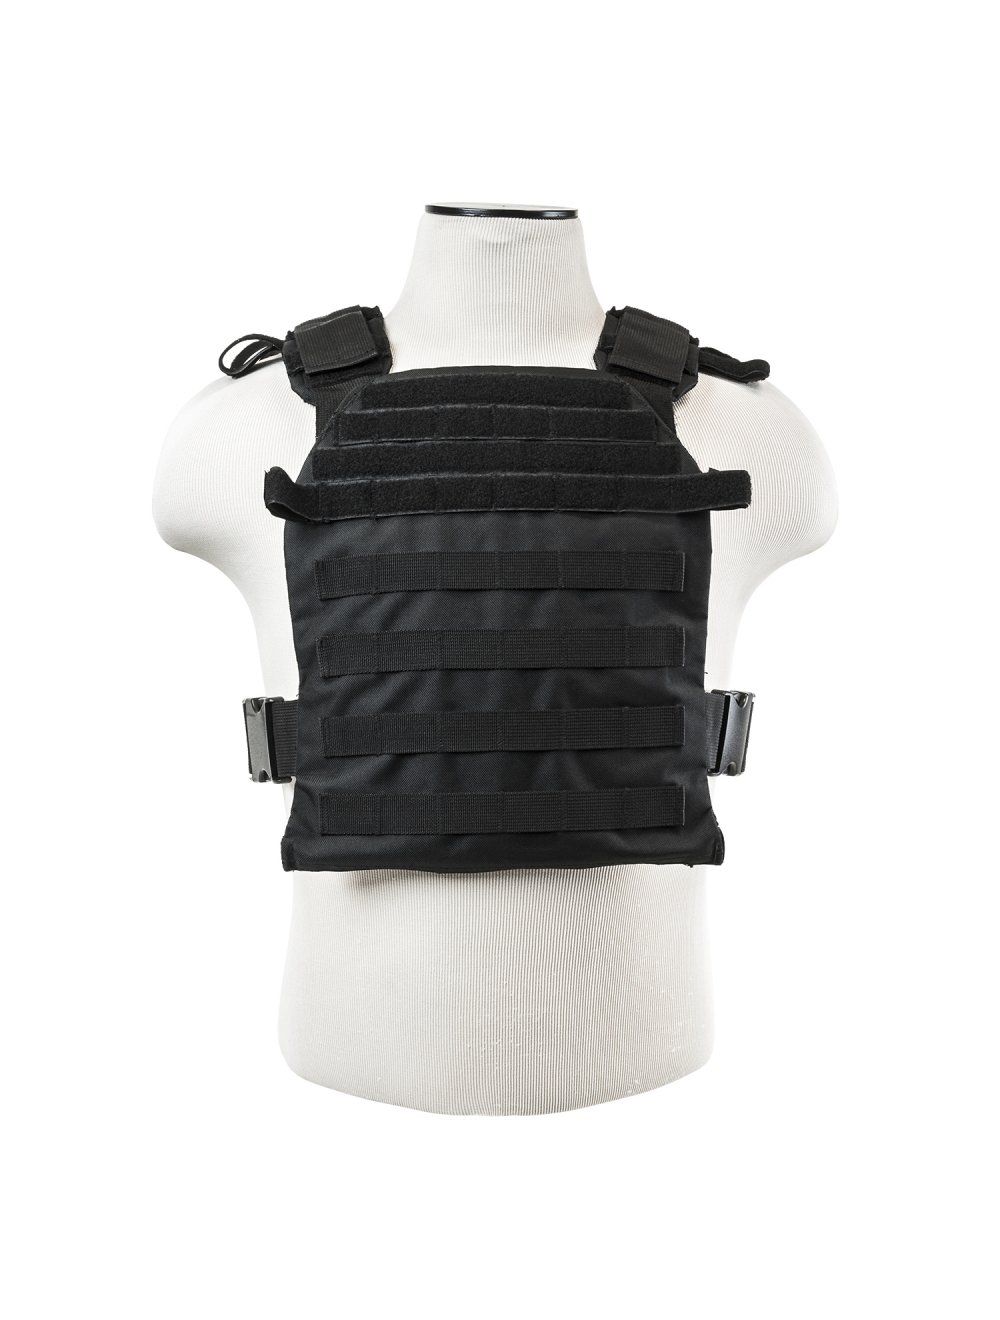 Fast Plate Carrier